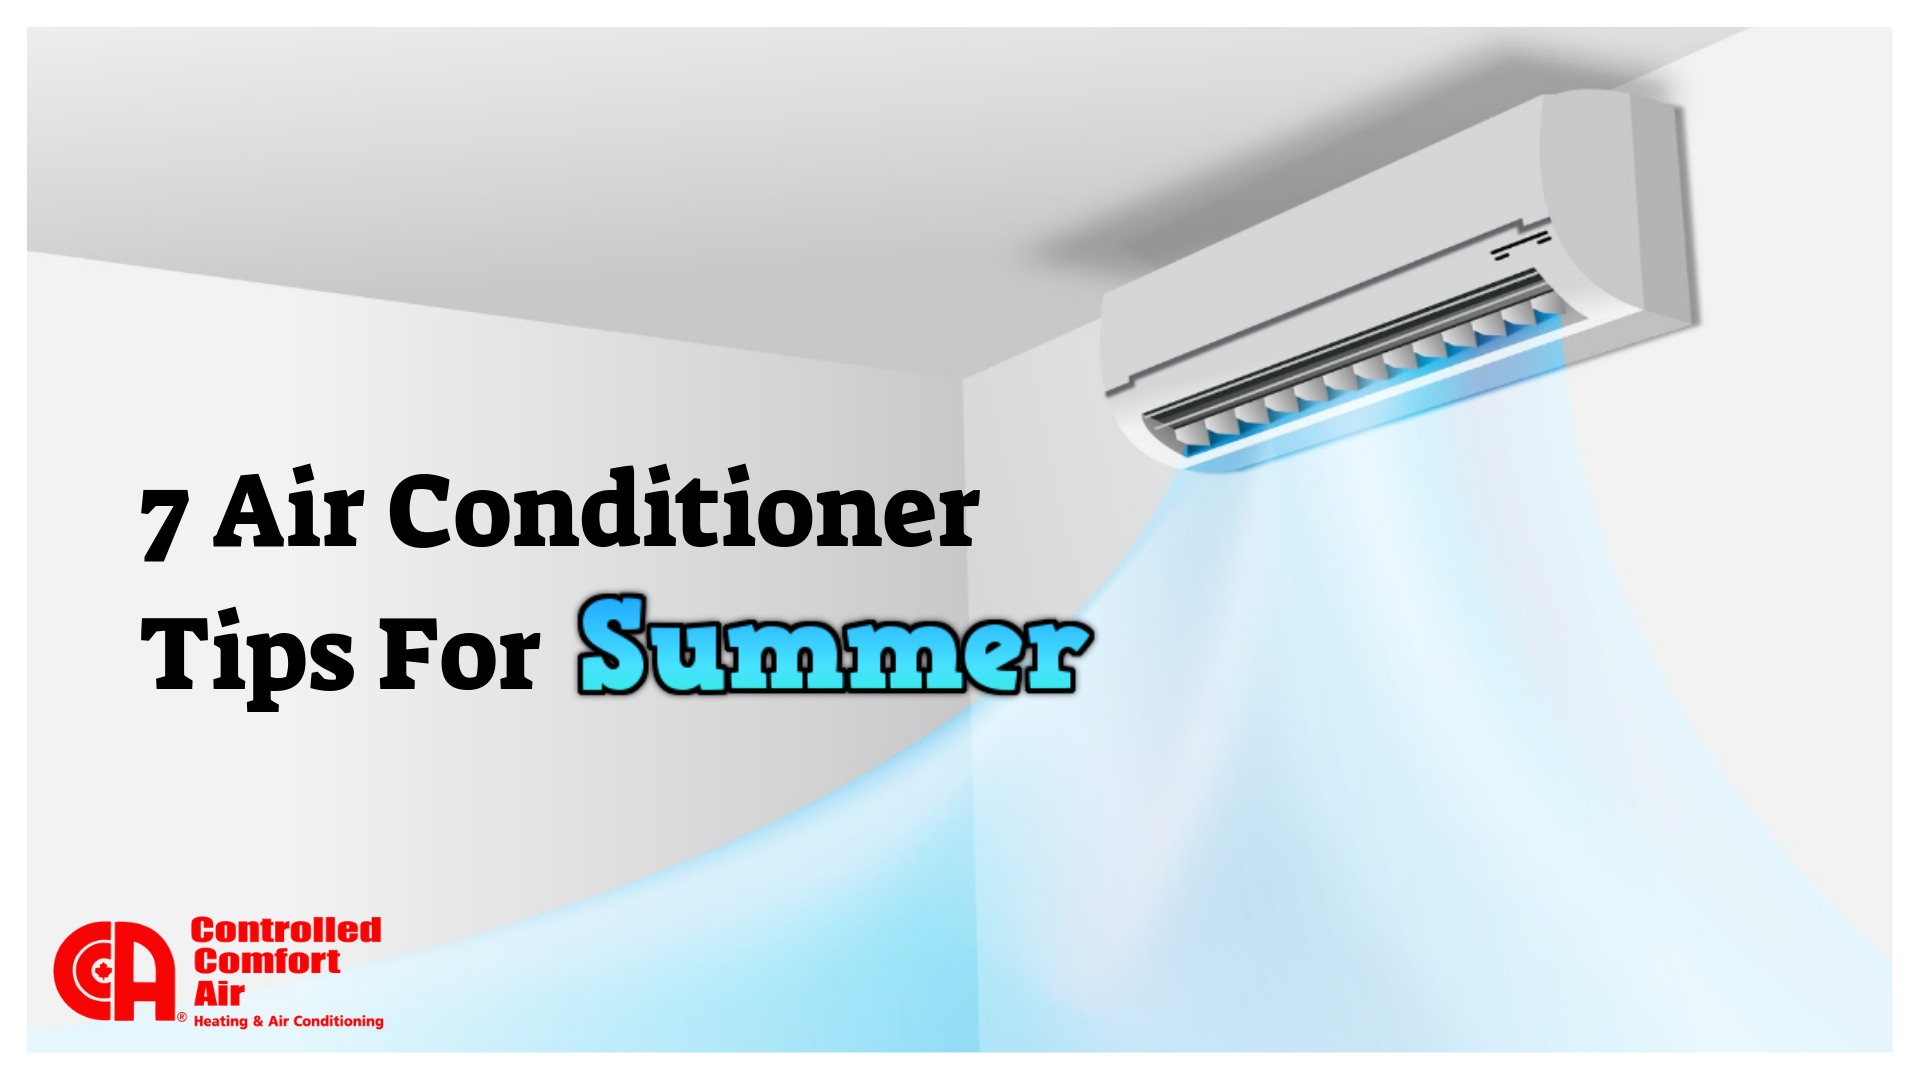 7 Air Conditioner Tips For The Summer